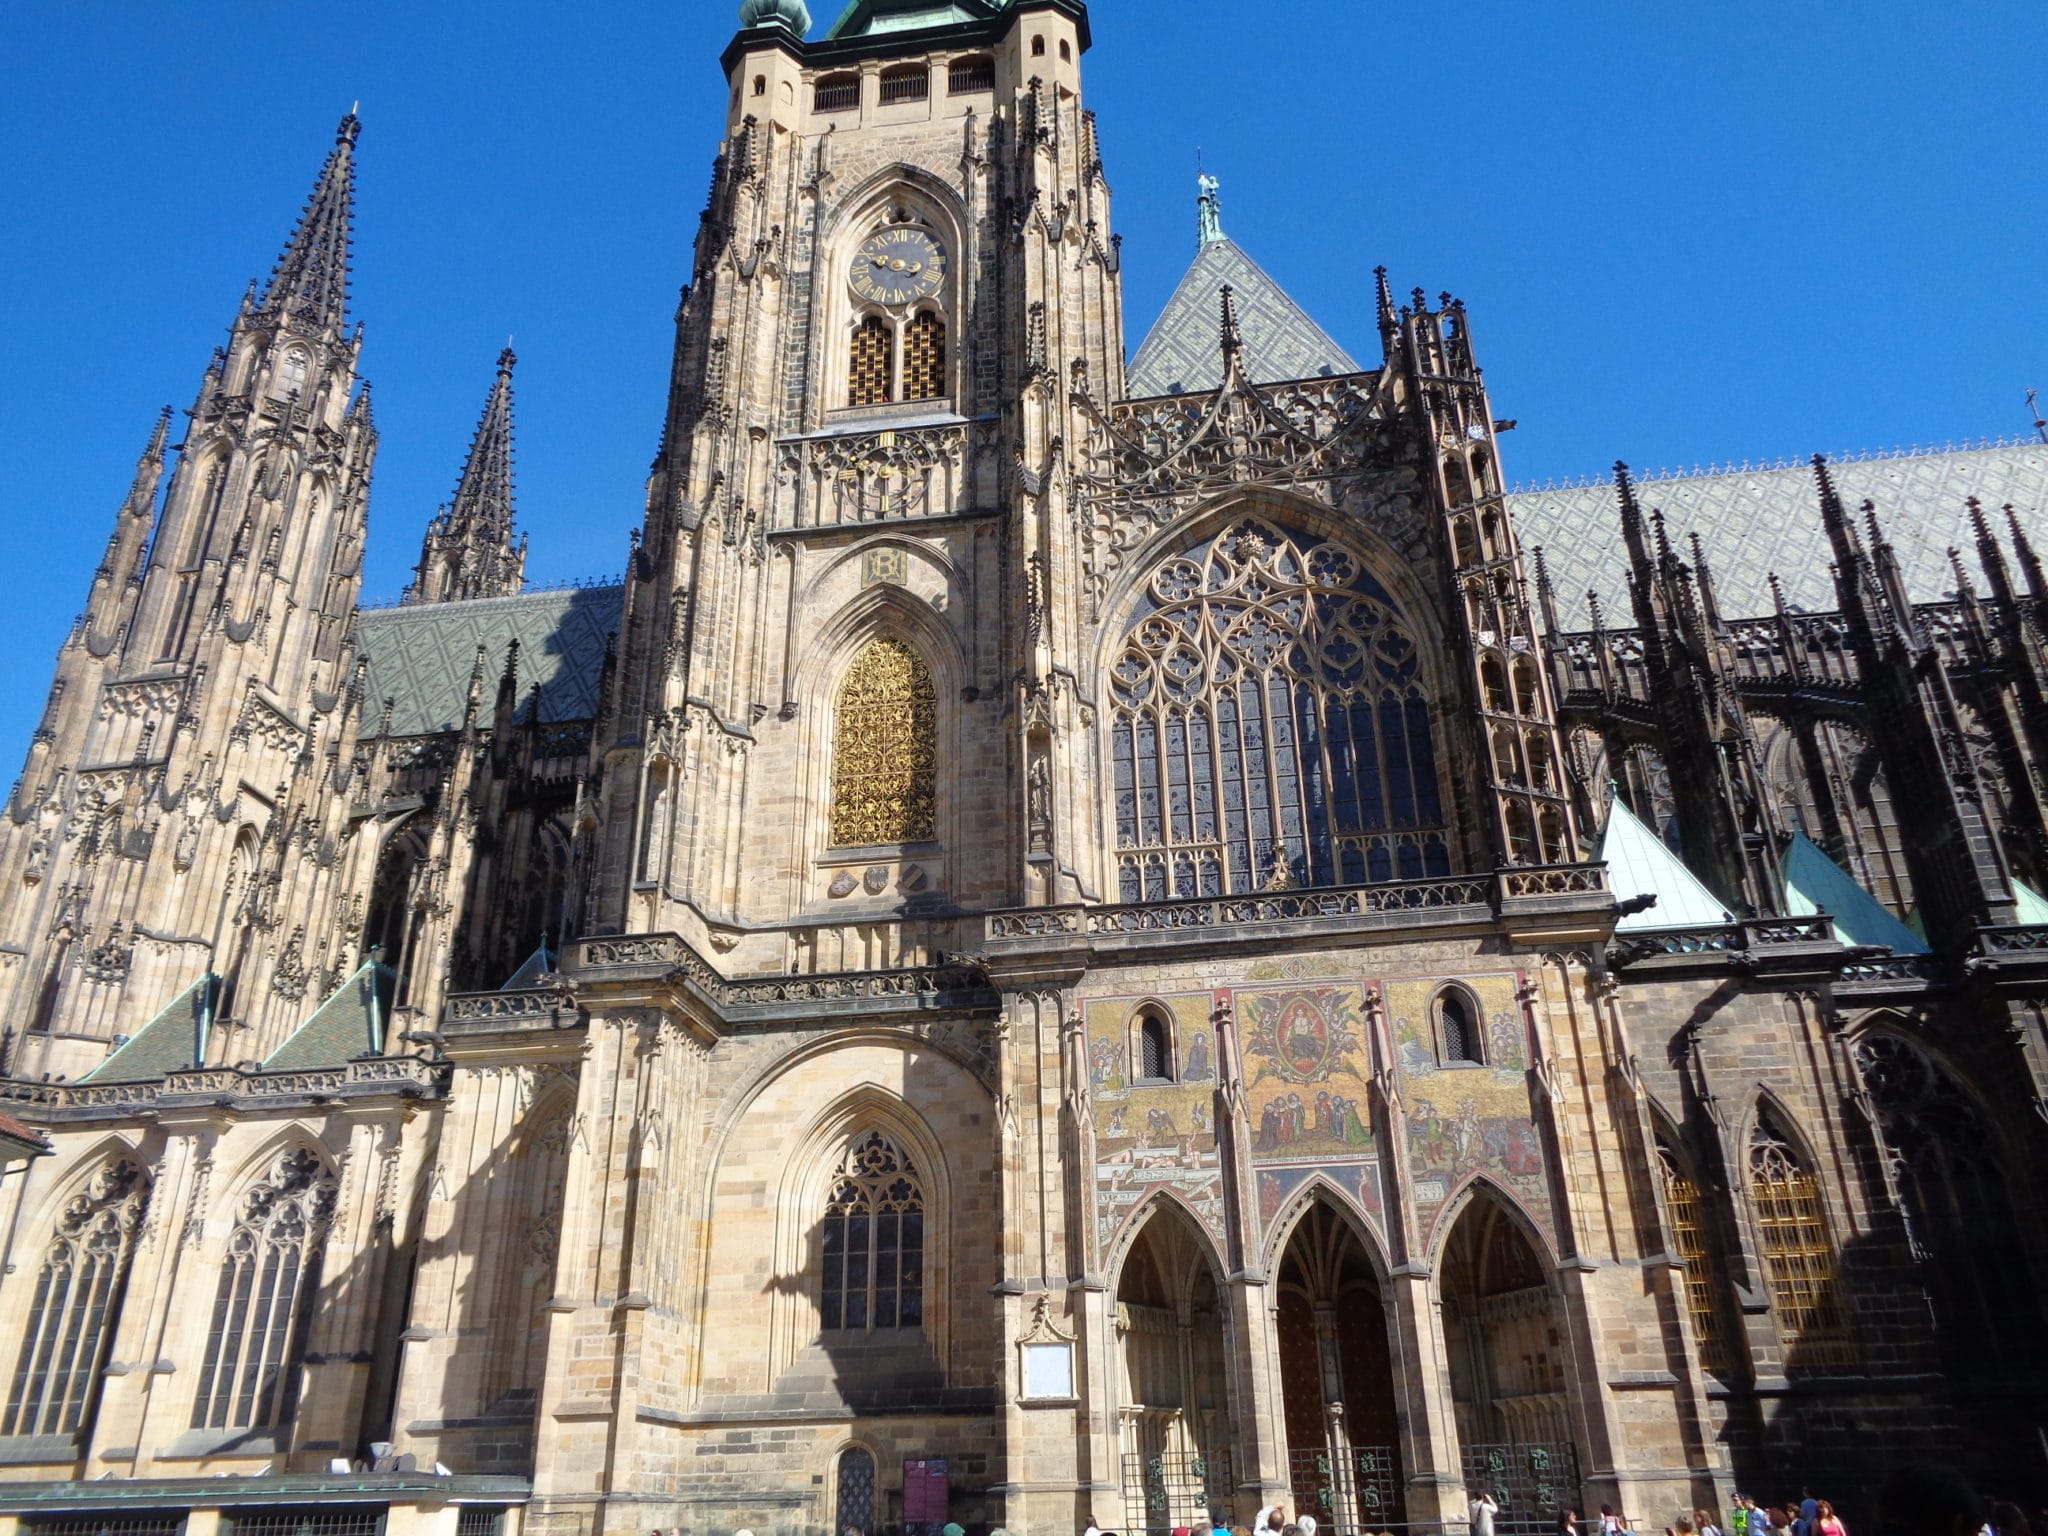 St. Vitus Cathedral - Top 10 Things to See and Do in Prague